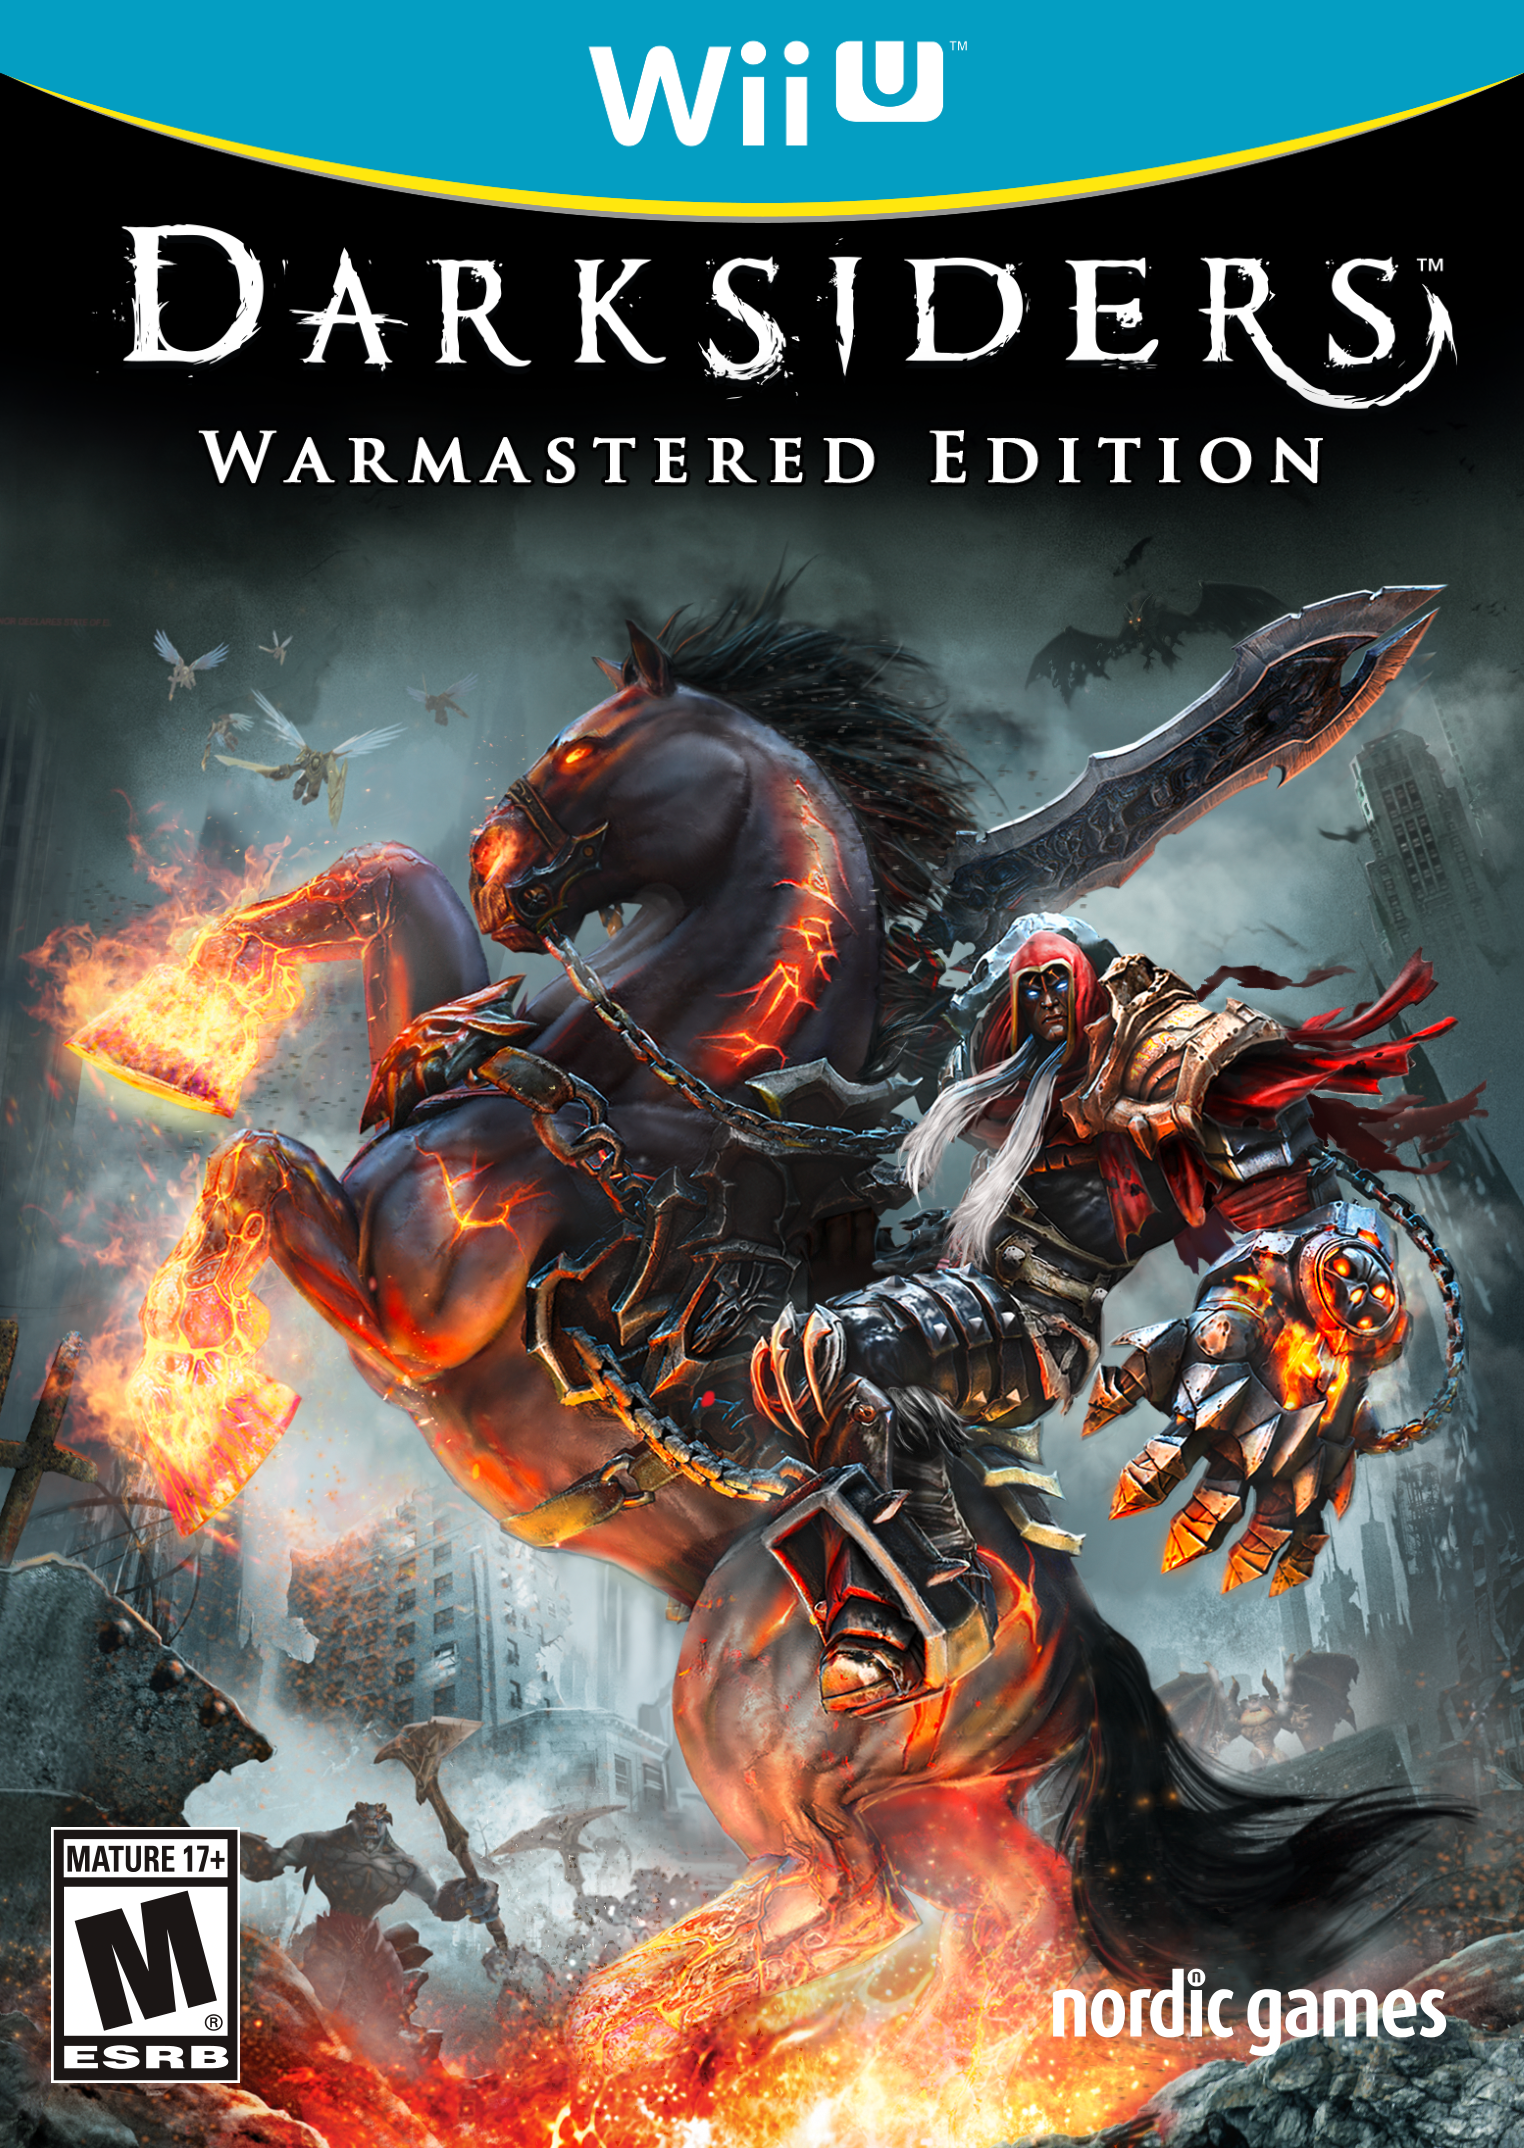 darksiders__warmastered_edition_wii_u_boxart_by_goldmetalsonic-dabszx9.png